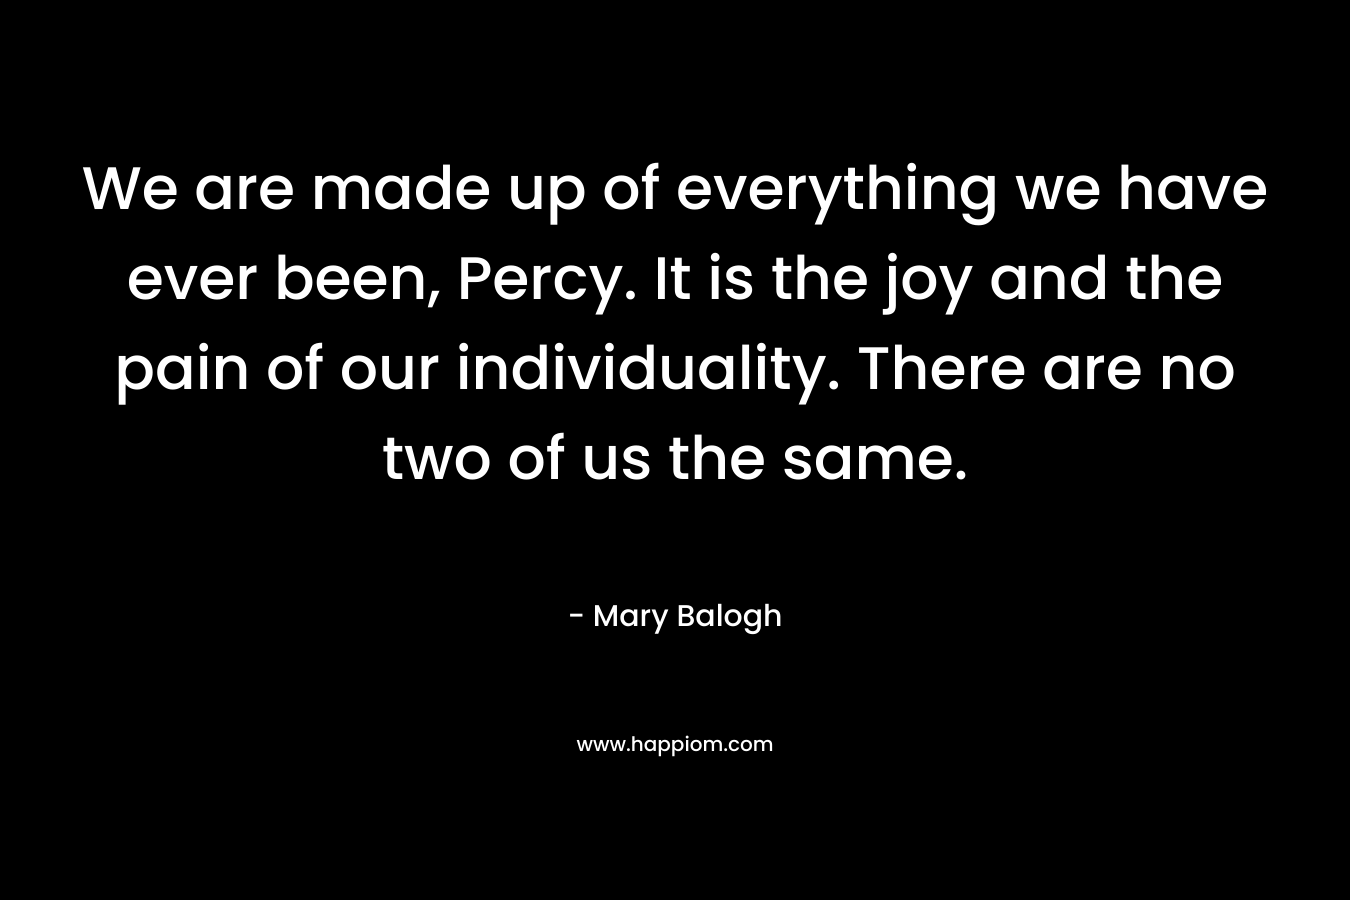 We are made up of everything we have ever been, Percy. It is the joy and the pain of our individuality. There are no two of us the same. – Mary Balogh